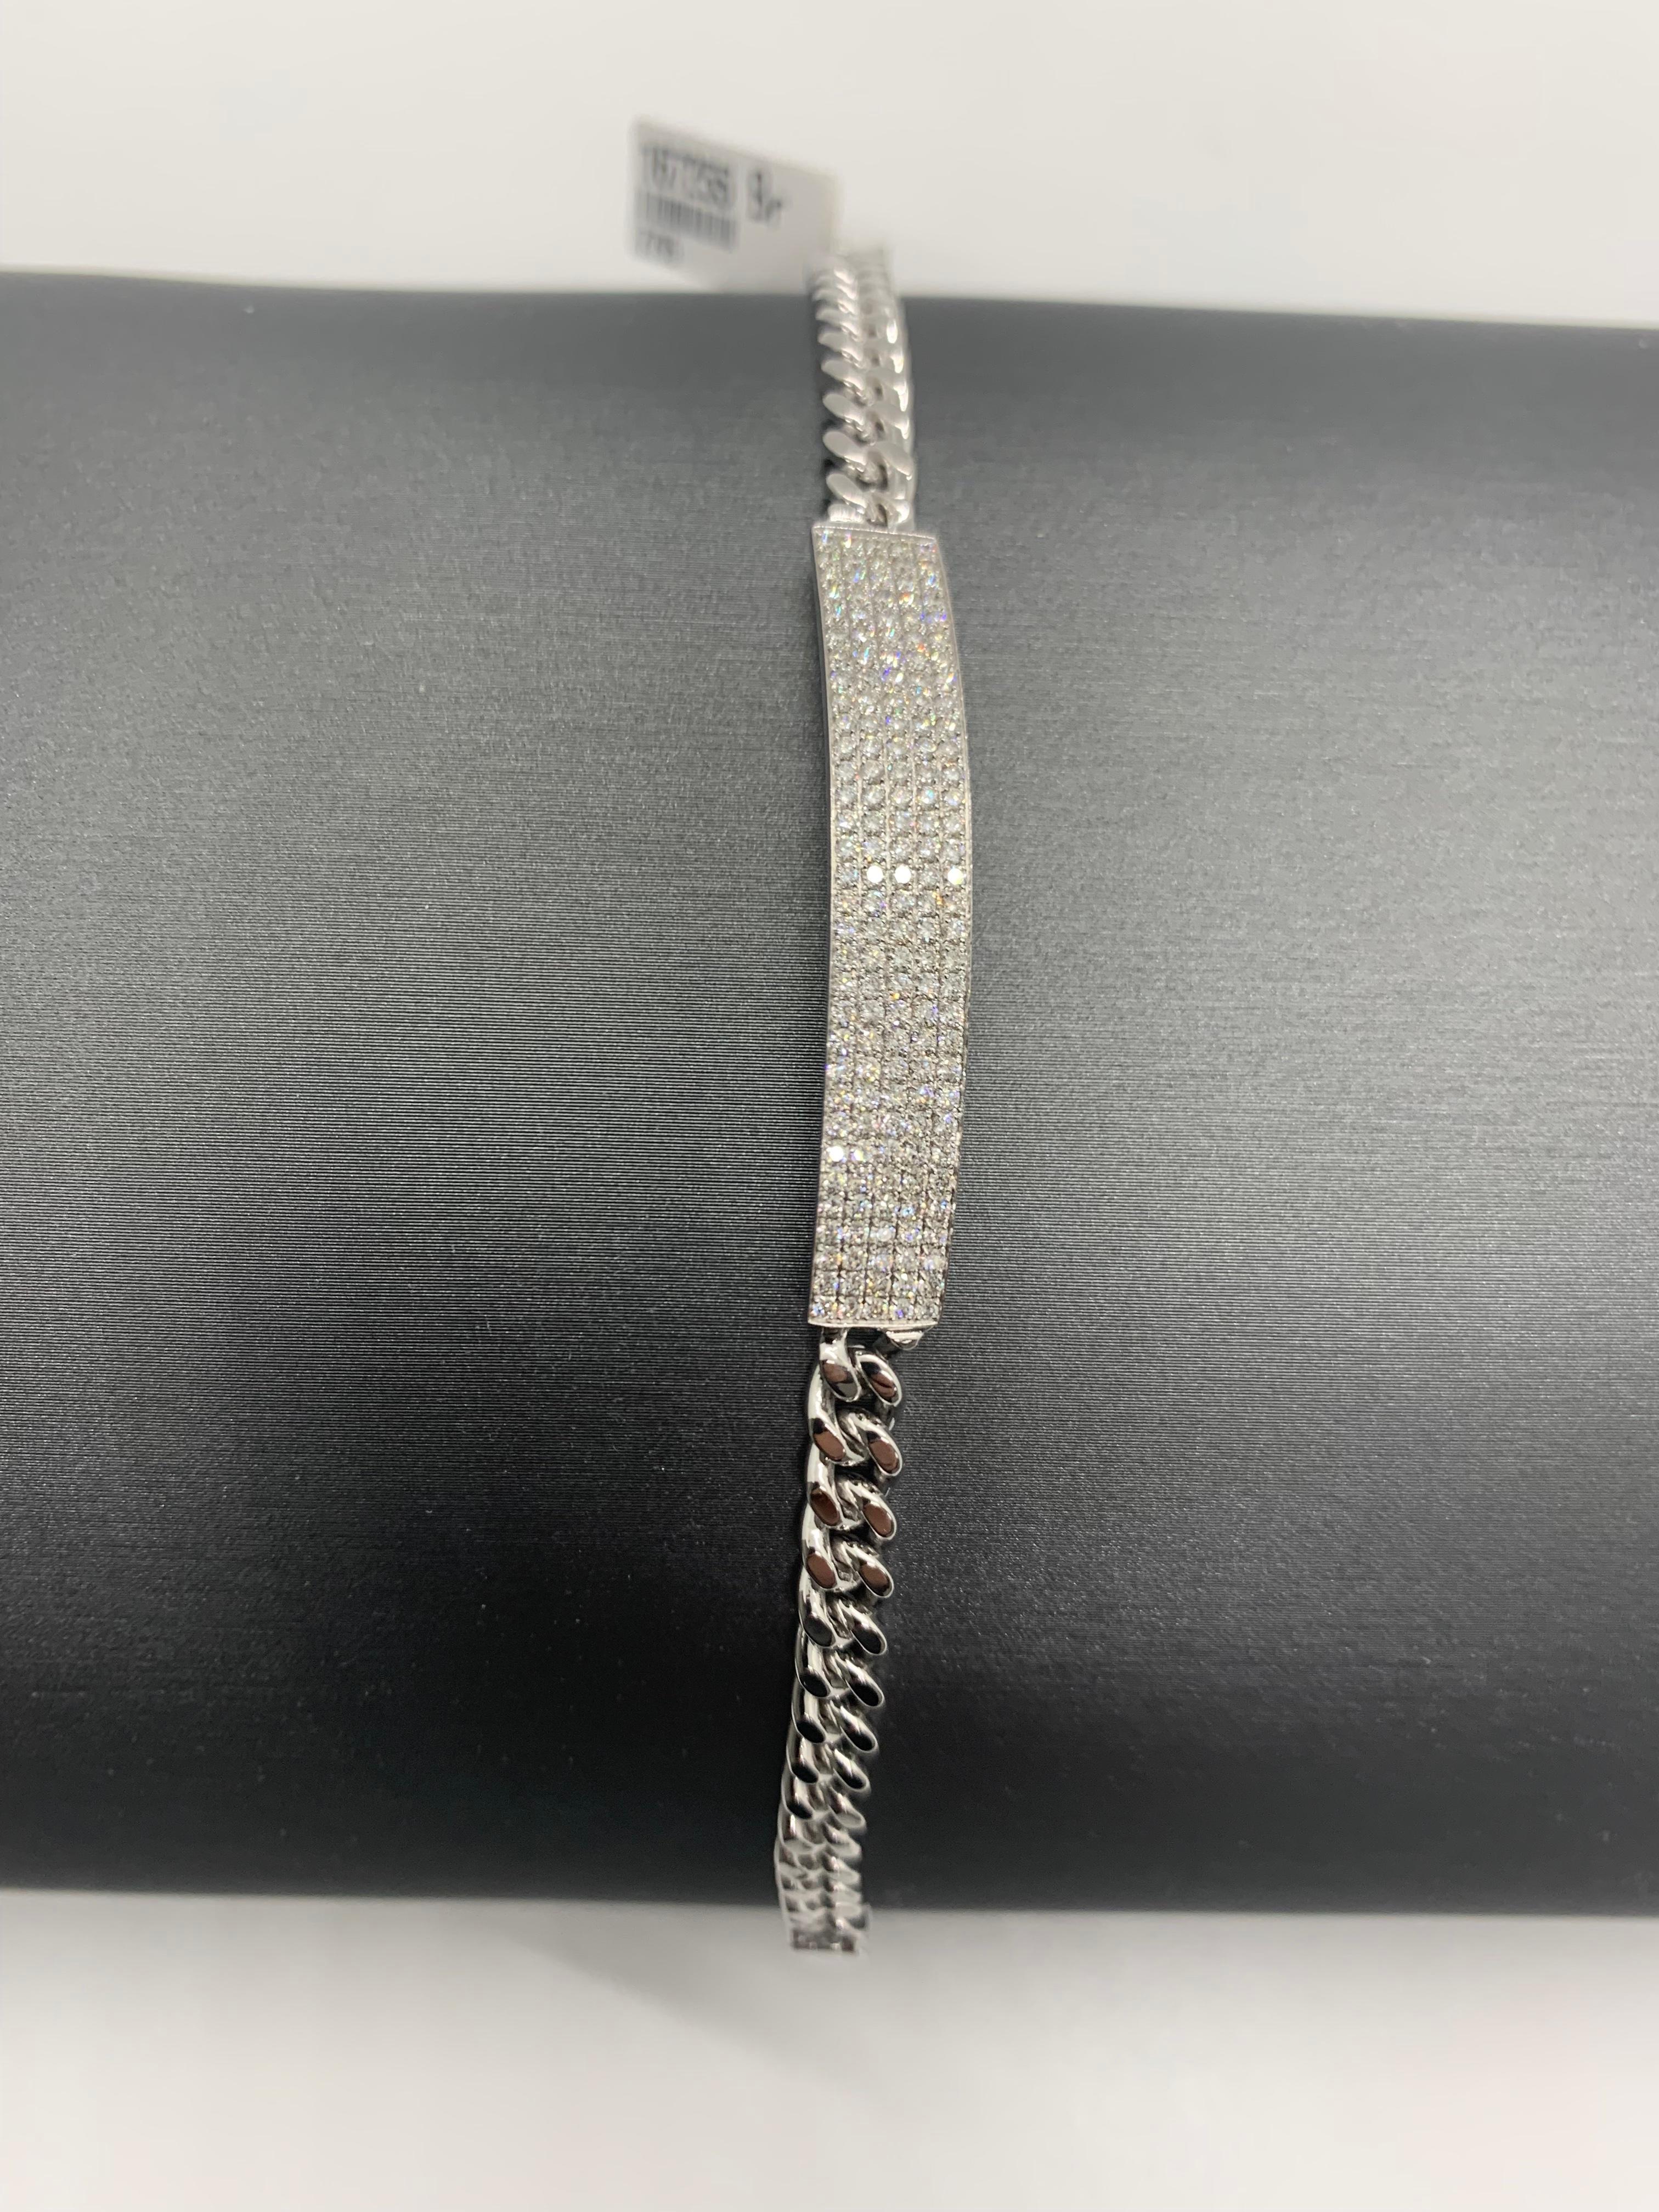 Round Cut Illusion Diamond Chain Bracelet in 18K White Gold, Large For Sale